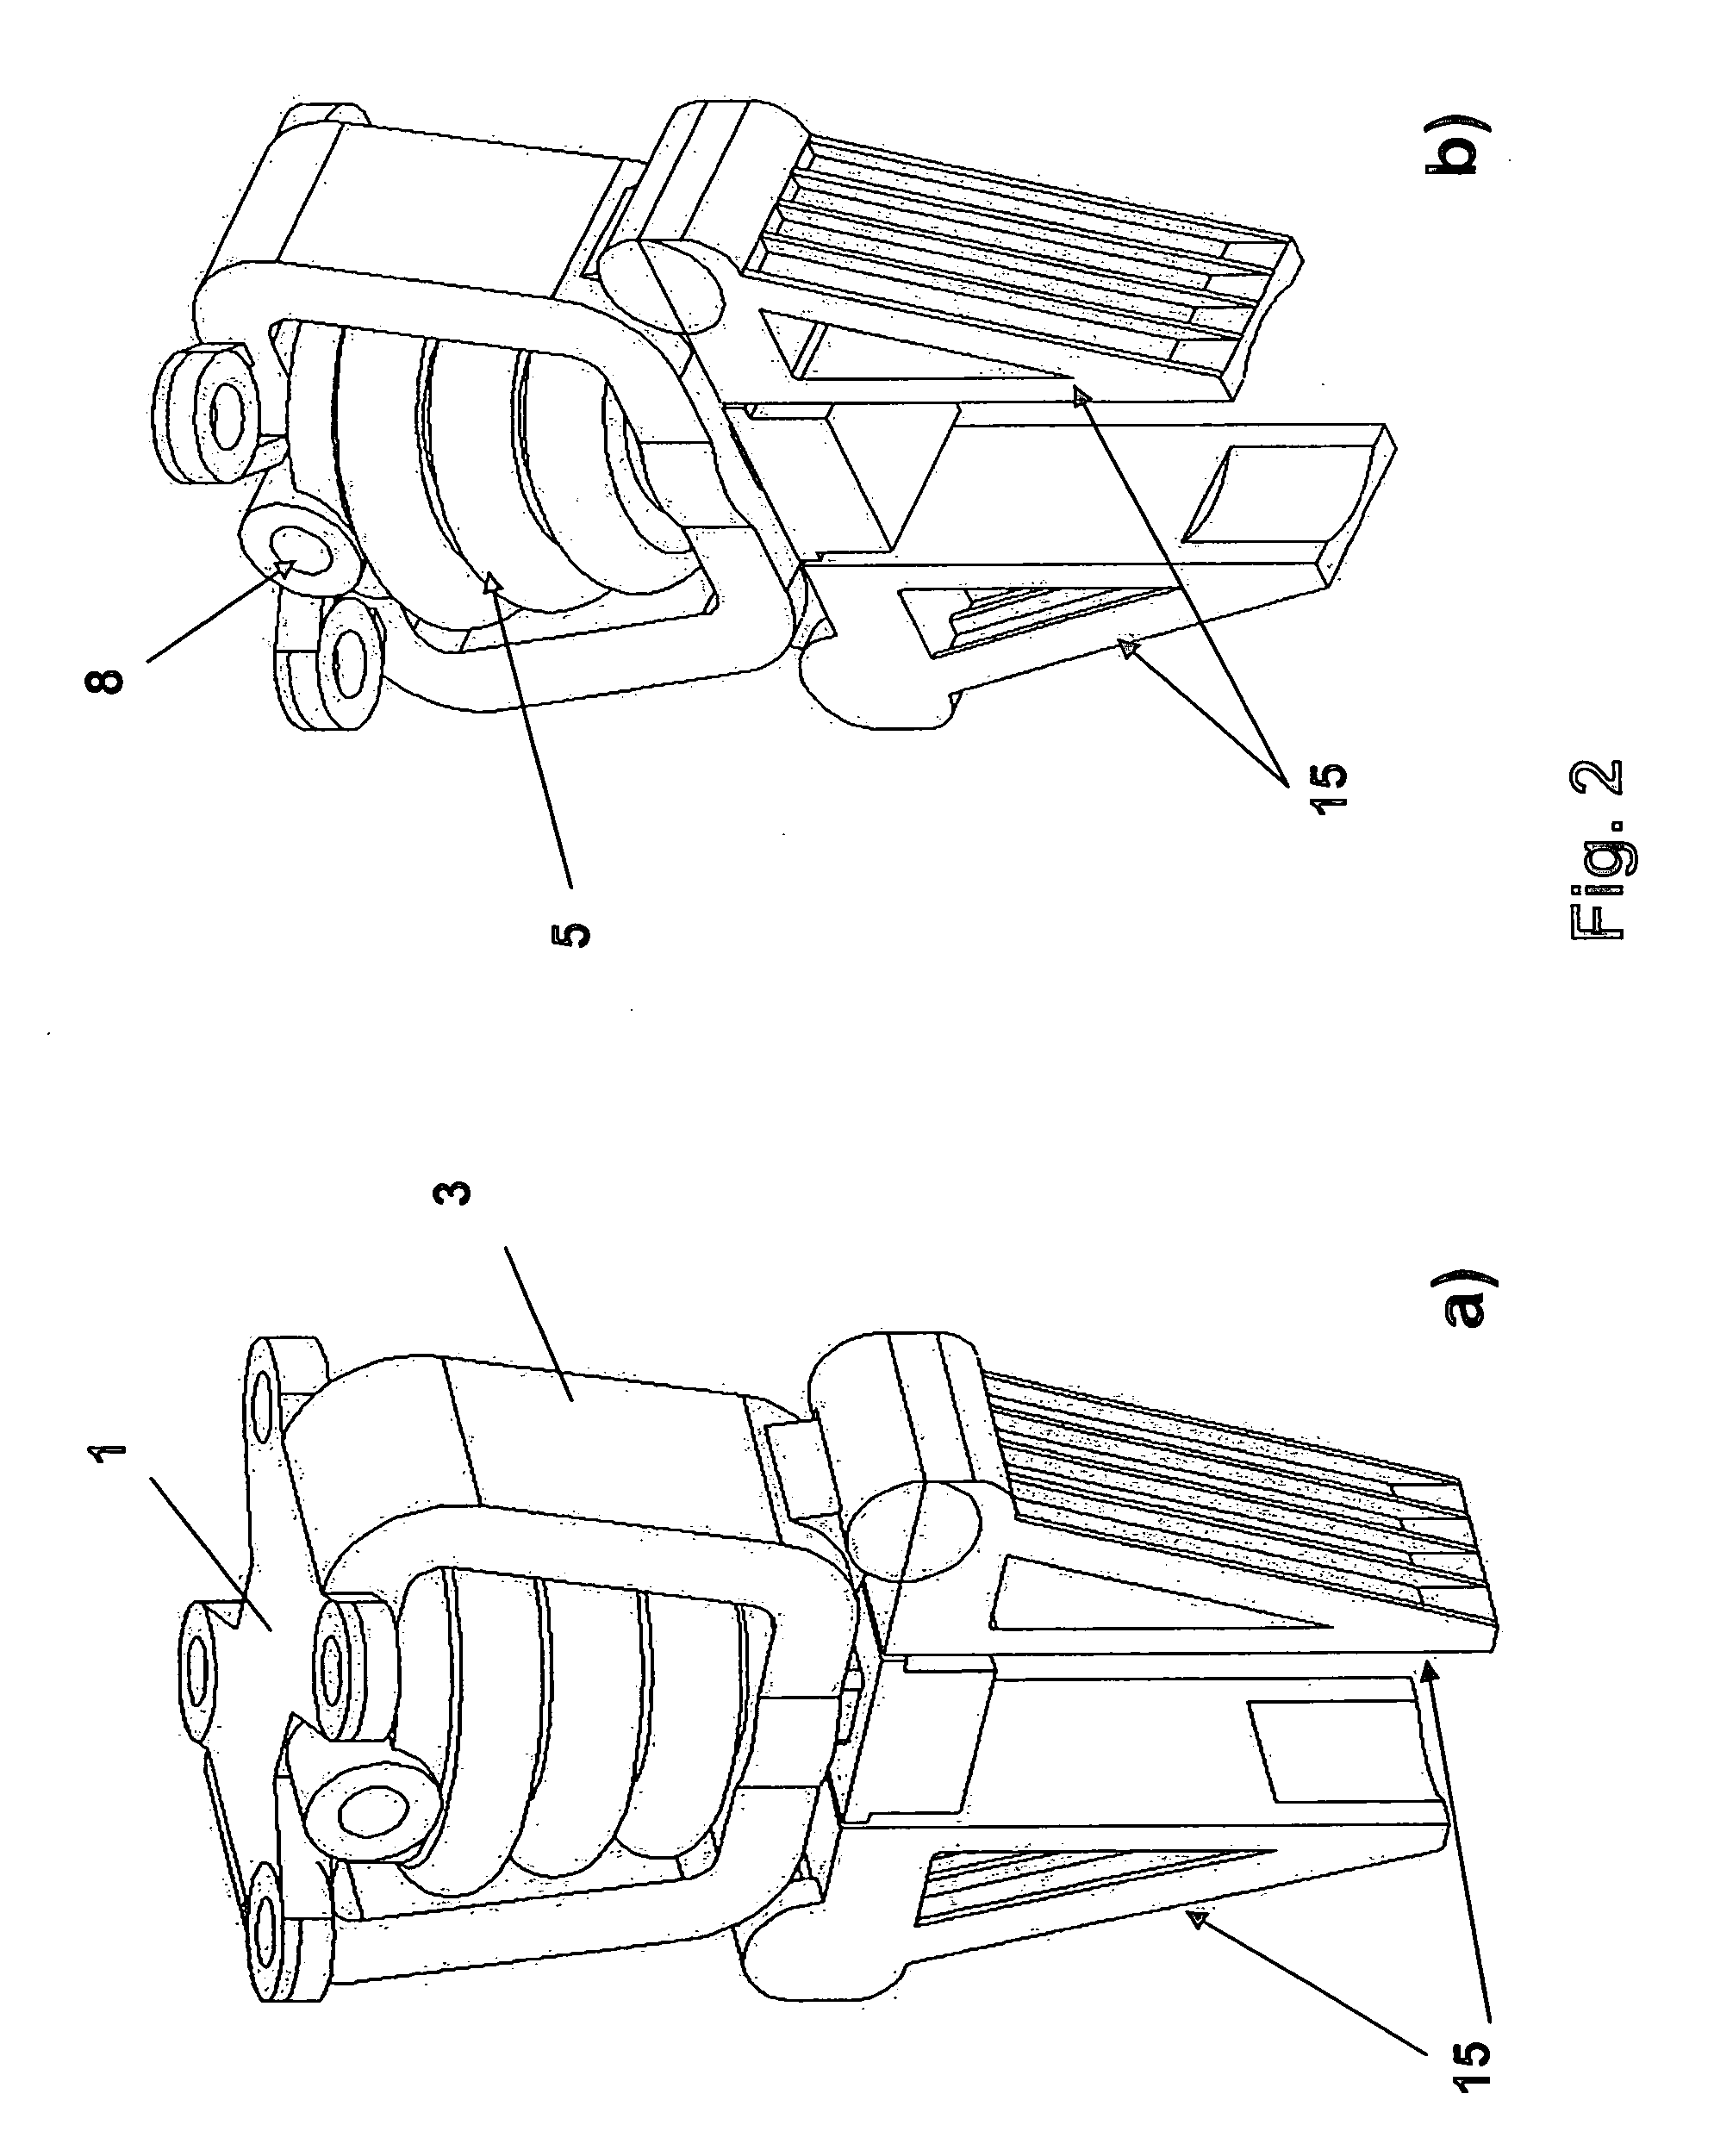 Robot Gripper and Method for Its Manufacture